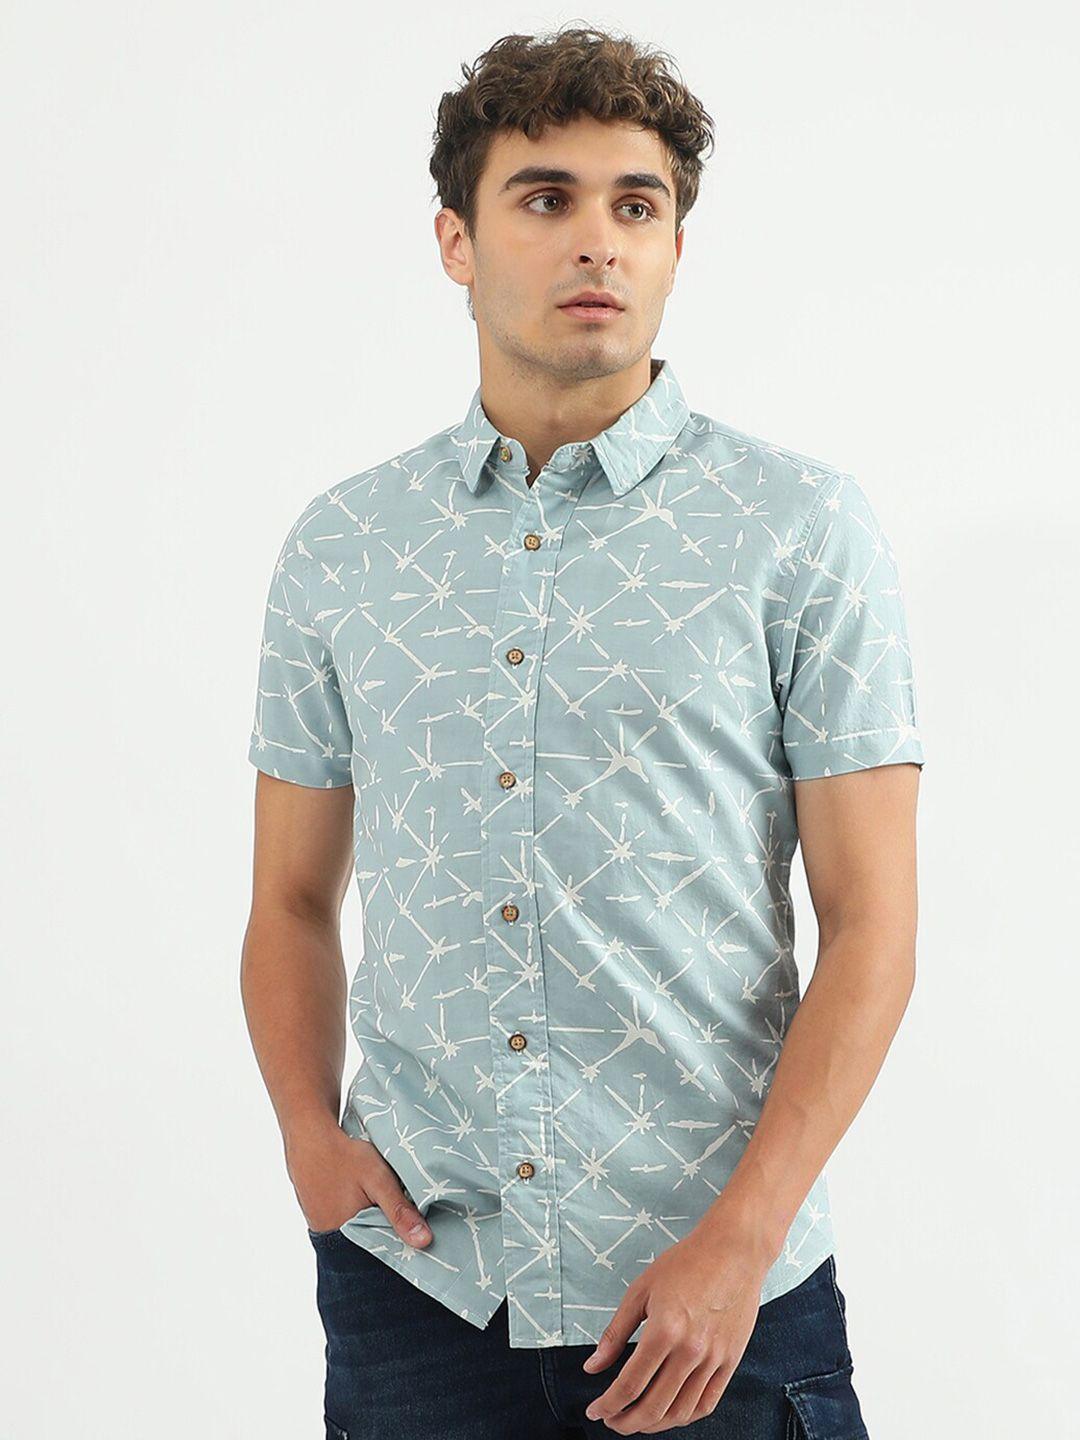 united-colors-of-benetton-men-slim-fit-printed-casual-linen-shirt